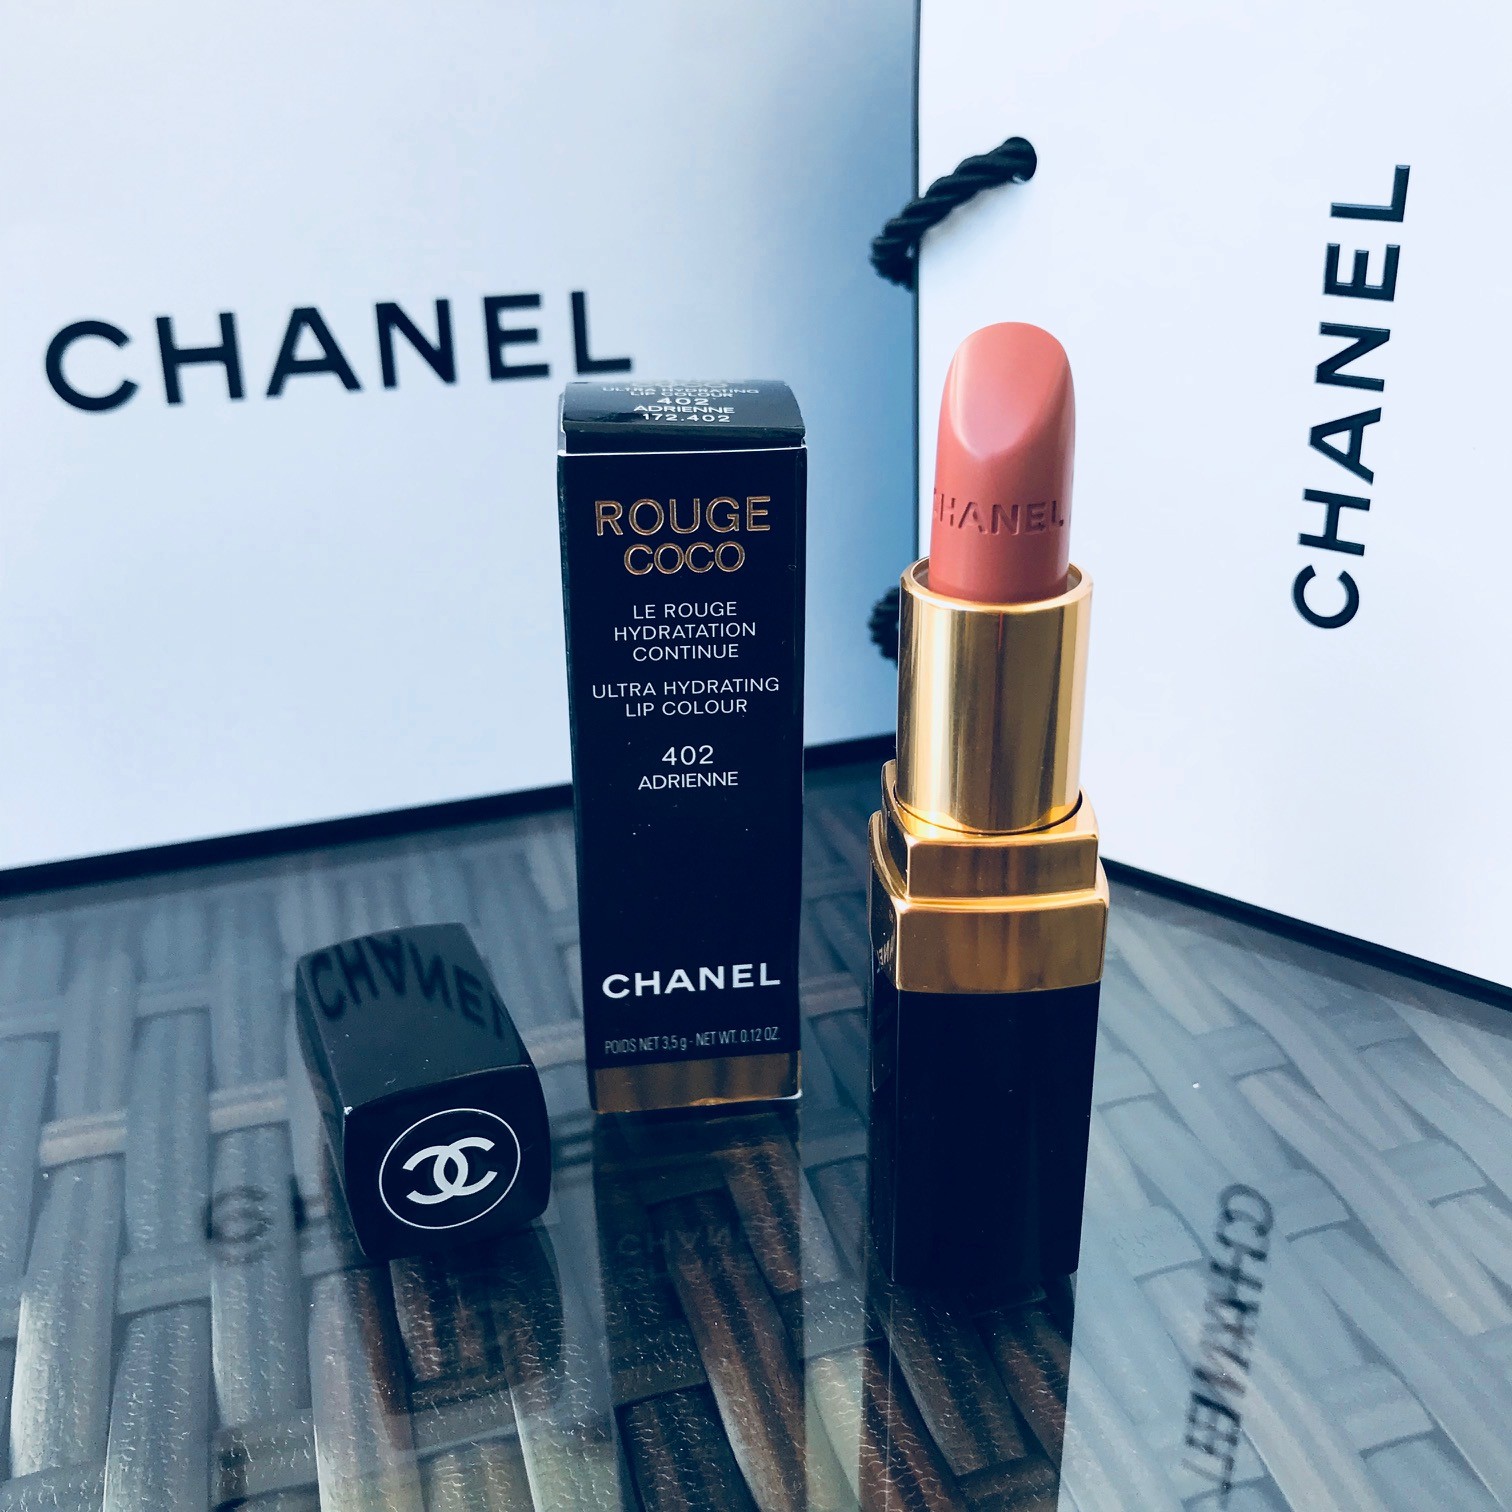 Chanel Lip Color Rouge Coco Hydrating Conditioning Lip Balm Singapore